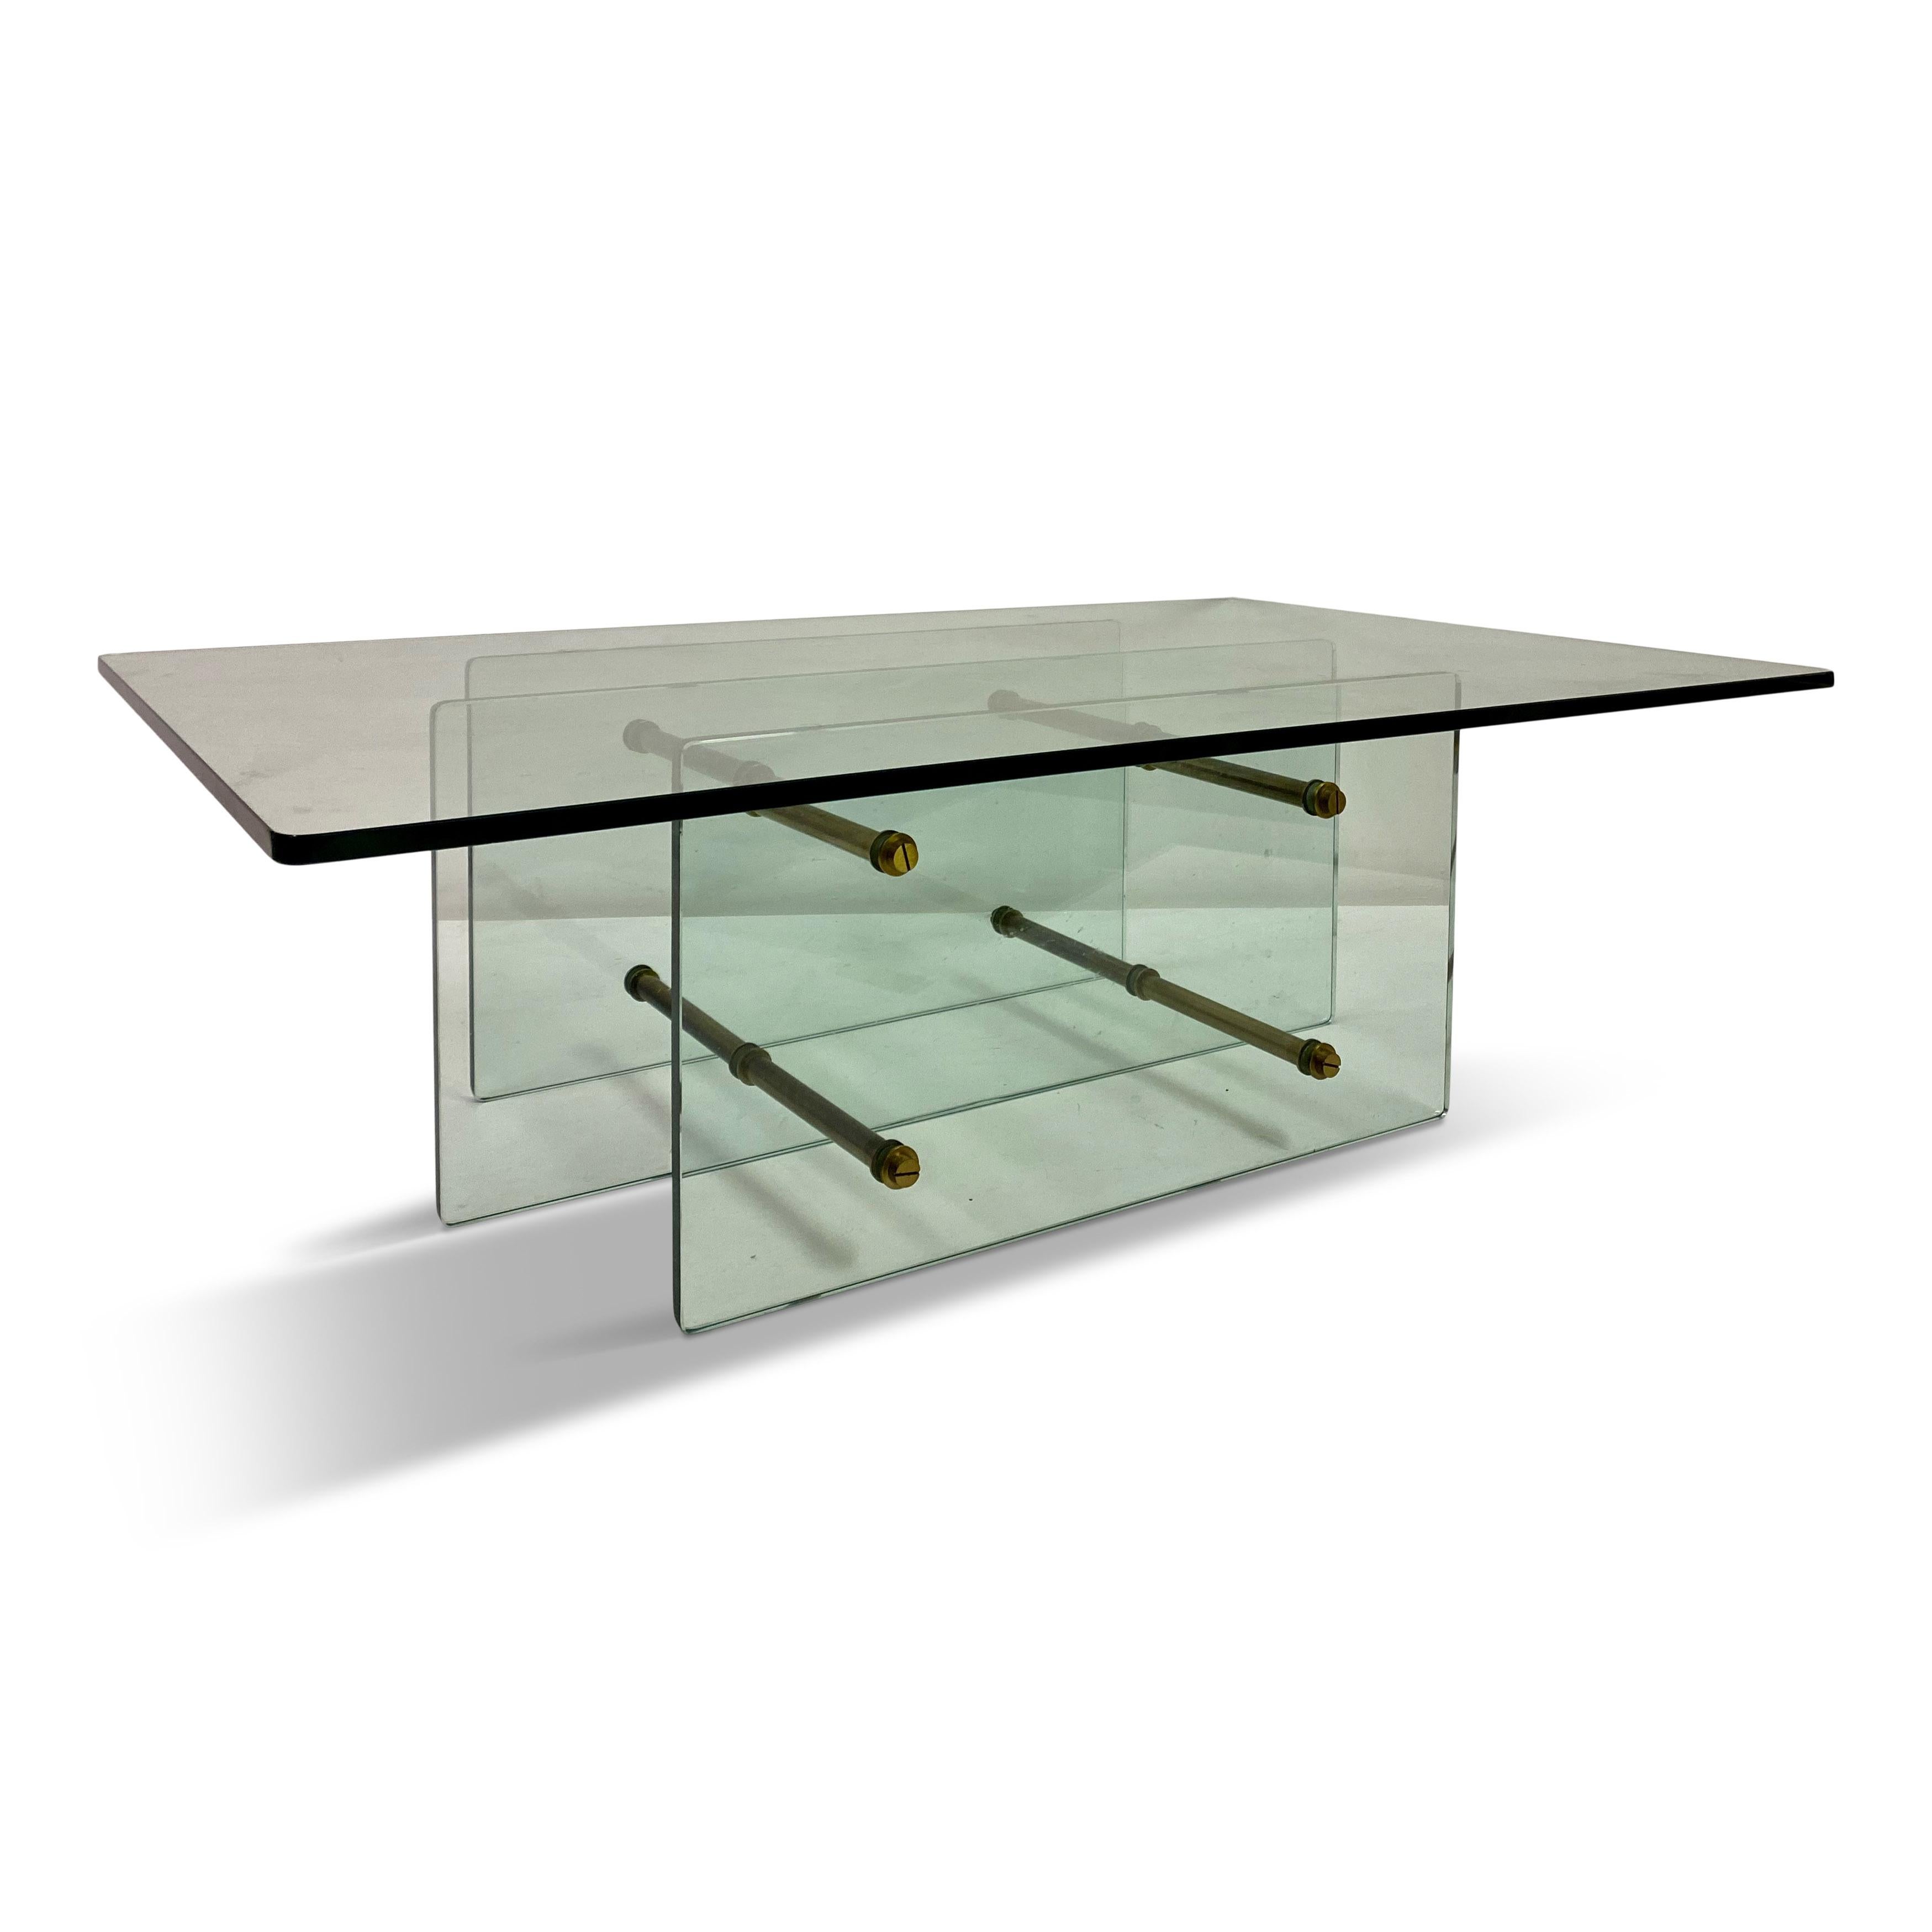 Coffee table

Attributed to Fontana Arte

Thick glass sections

Brass rods holding it together

1960s Italy.